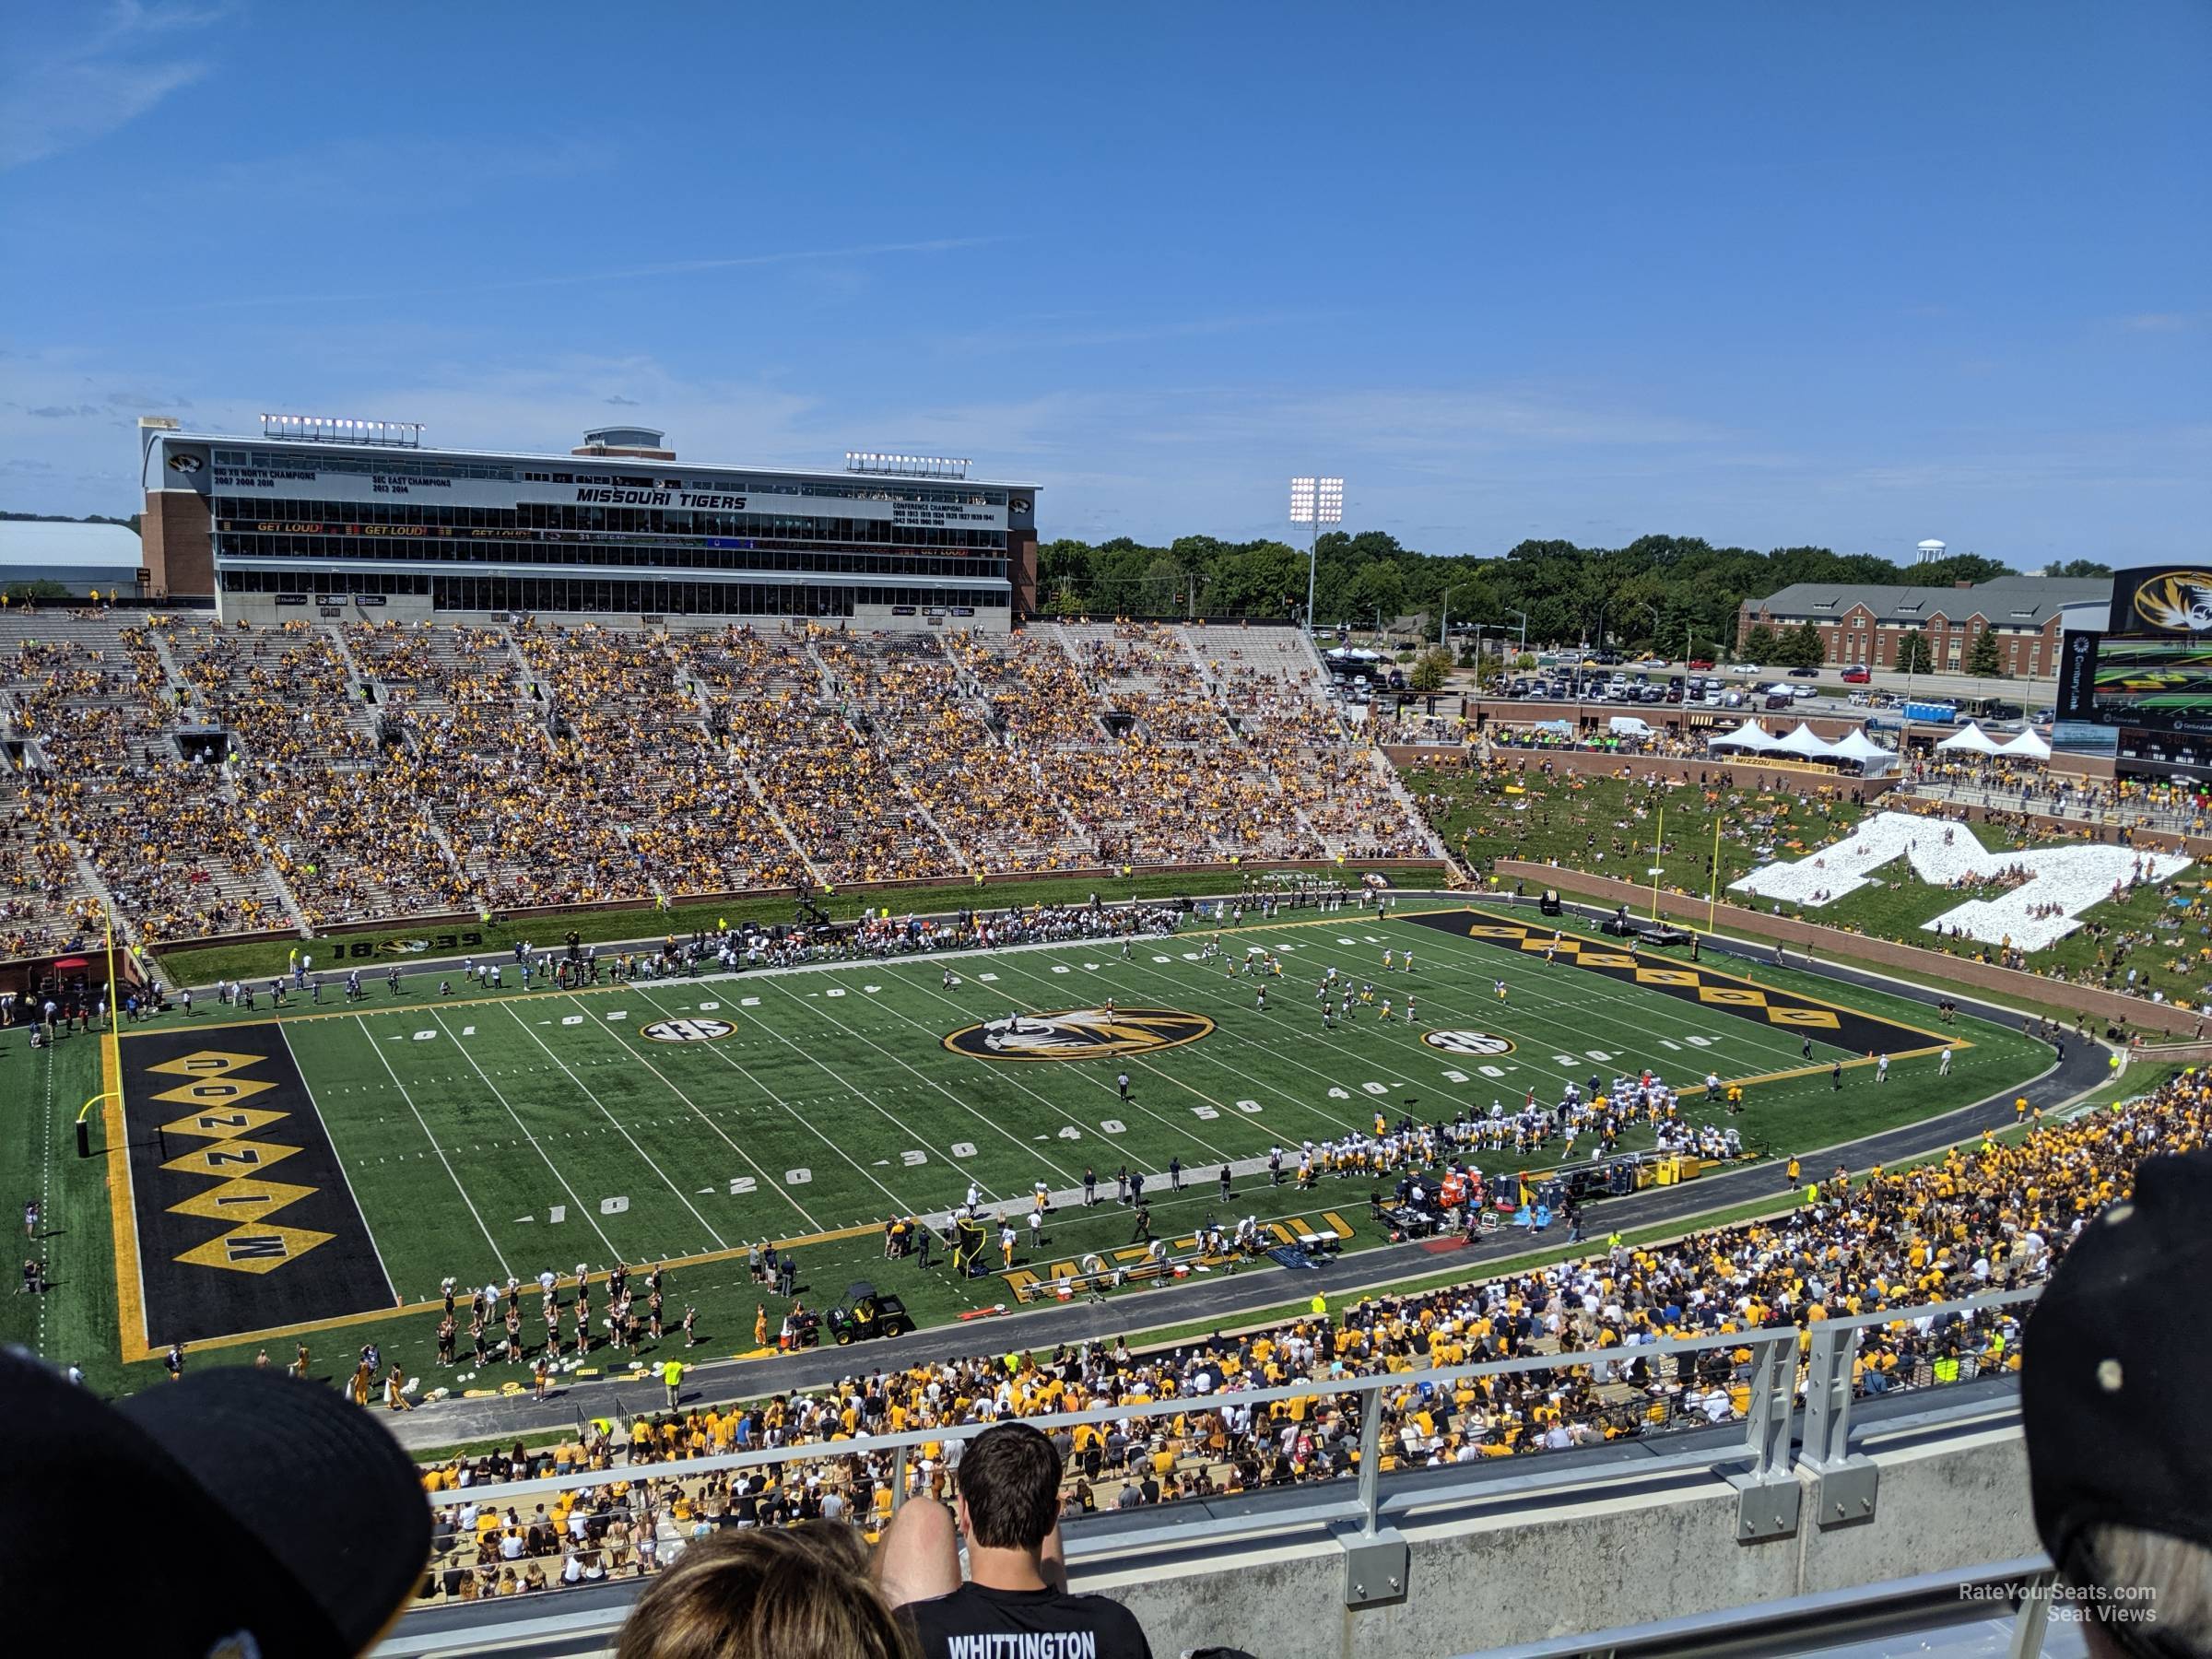 section 303, row 4 seat view  - faurot field